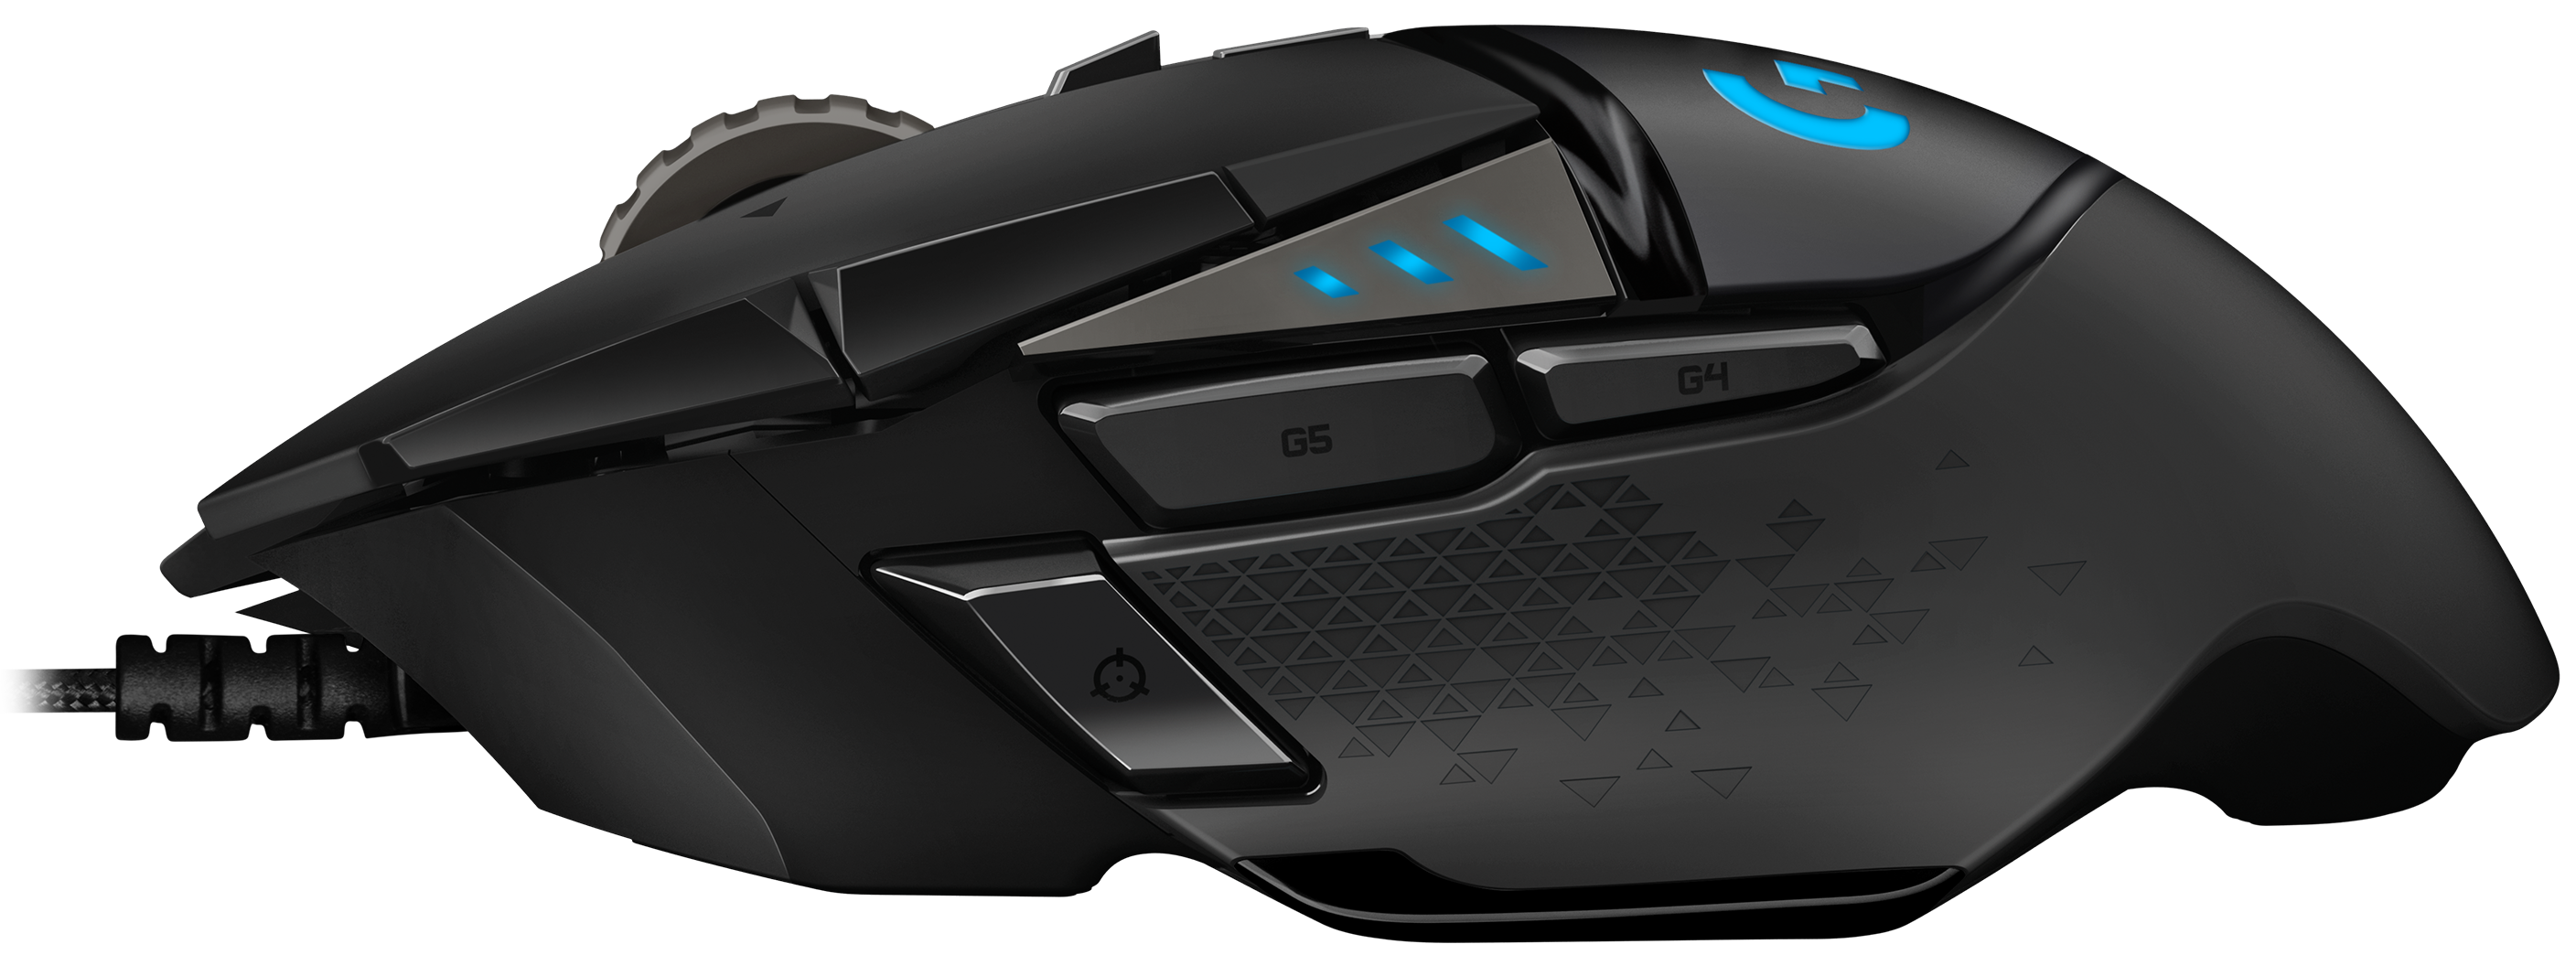 On-Board Memory 16.8 Million Color LIGHTSYNC RGB 11 Programmable Buttons Hero 25K Sensor Logitech G502 Hero K/DA High Performance Gaming Mouse Official League of Legends Gaming Gear 